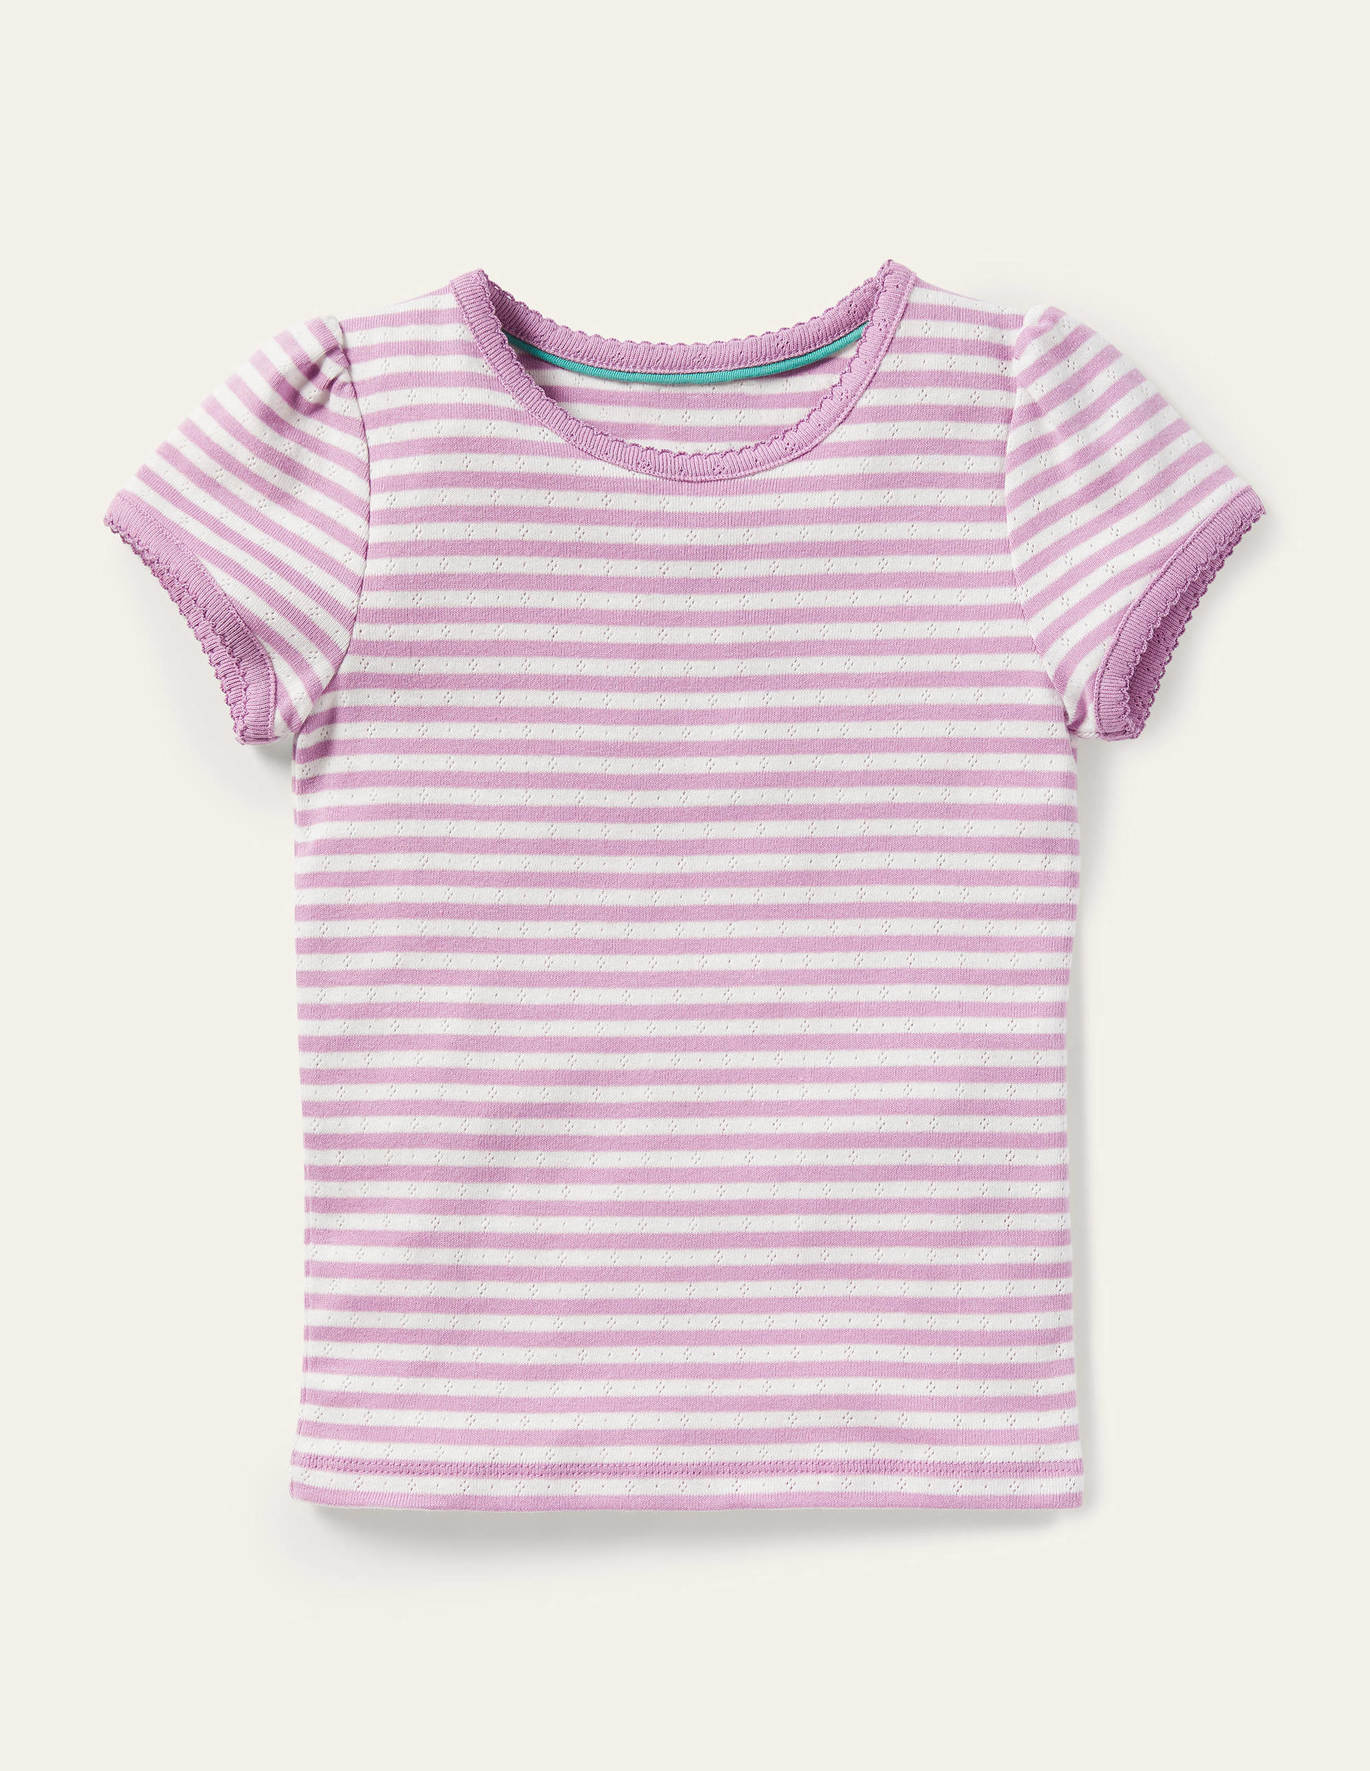 Boden Short-Sleeved Pointelle Top - Lilac Purple/ Ivory